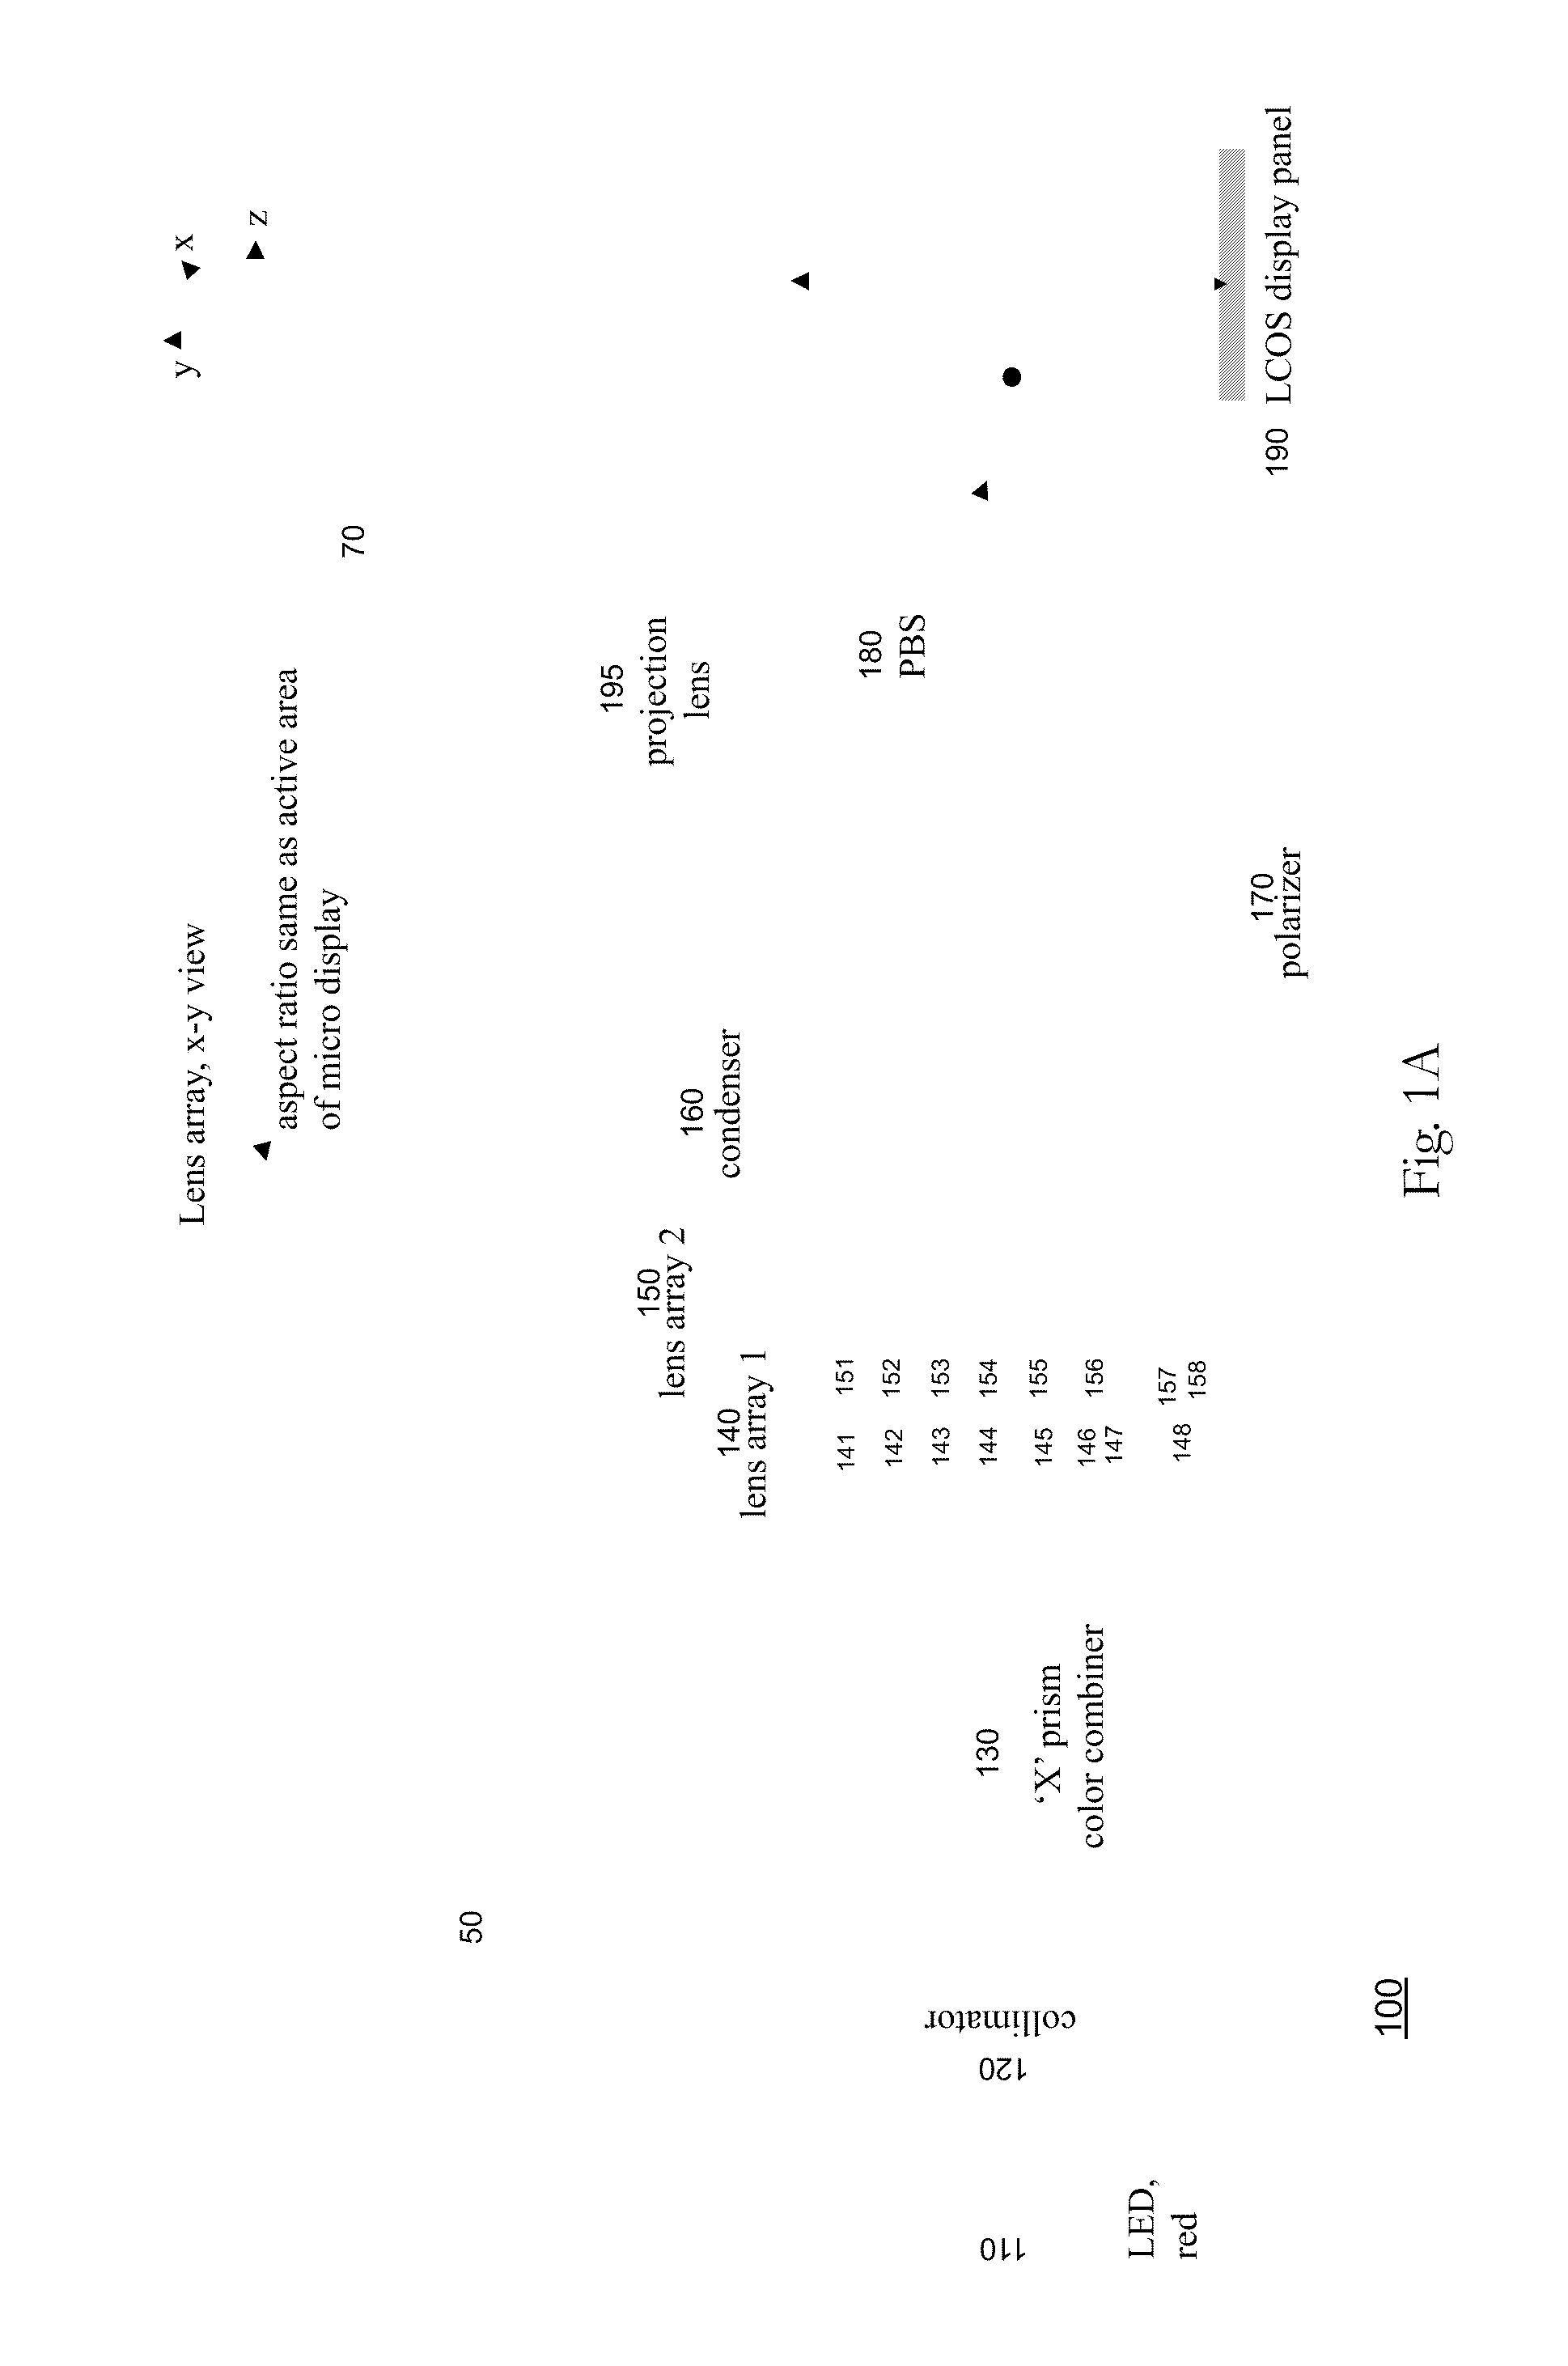 Systems and methods for handheld projection displays